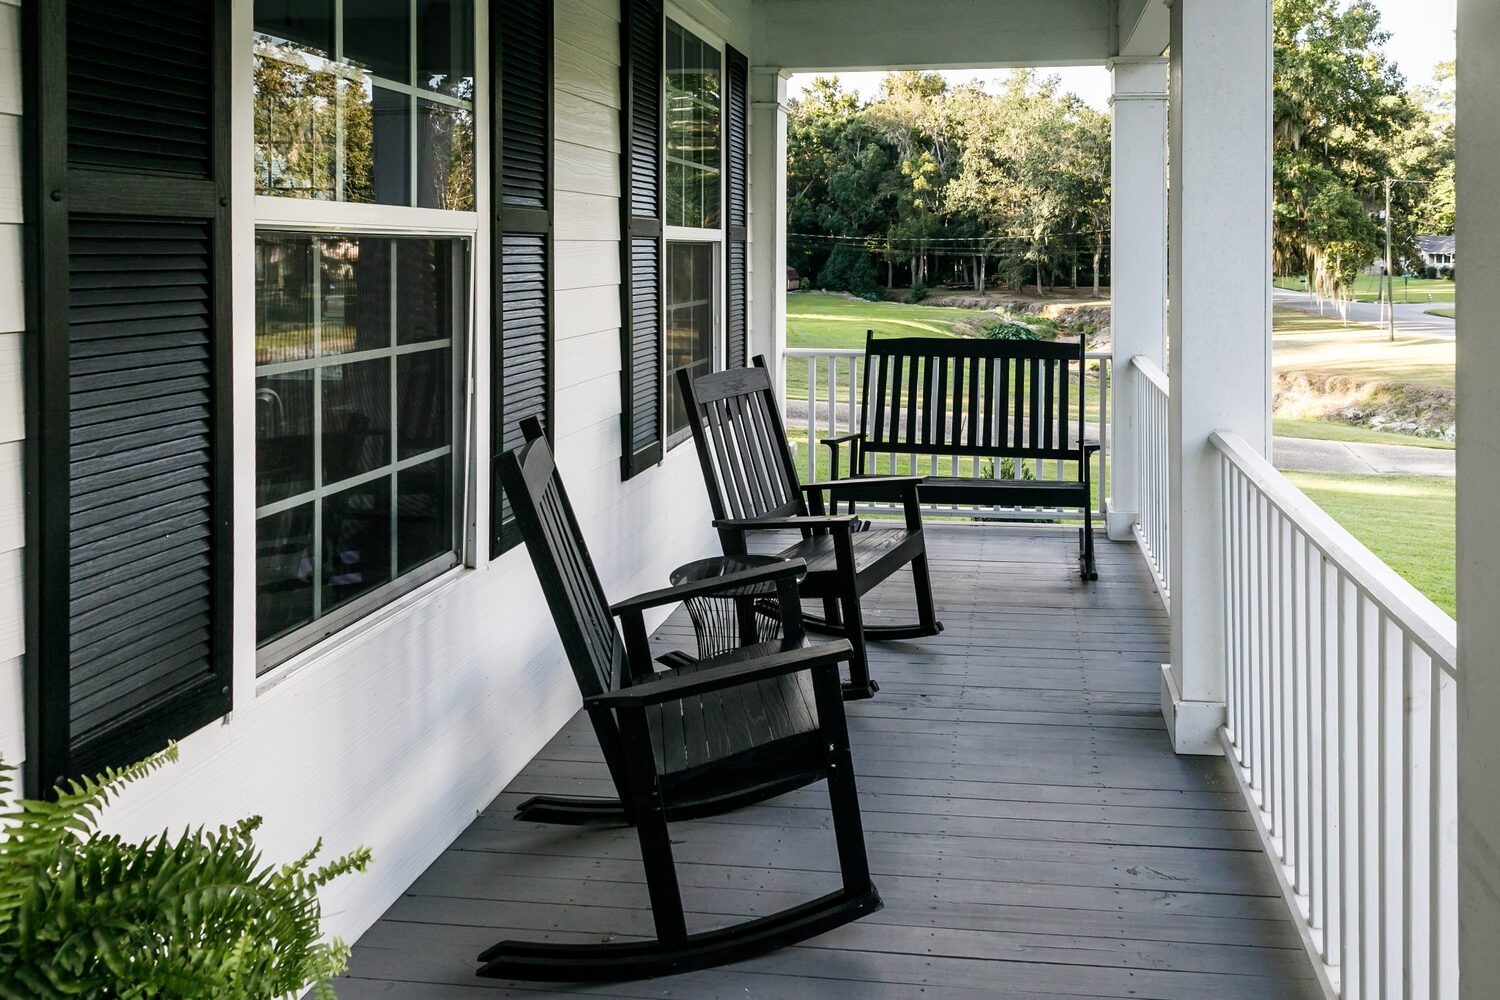 Top-notch craftsmanship in the white wooden porch done by porch builders Northbrook